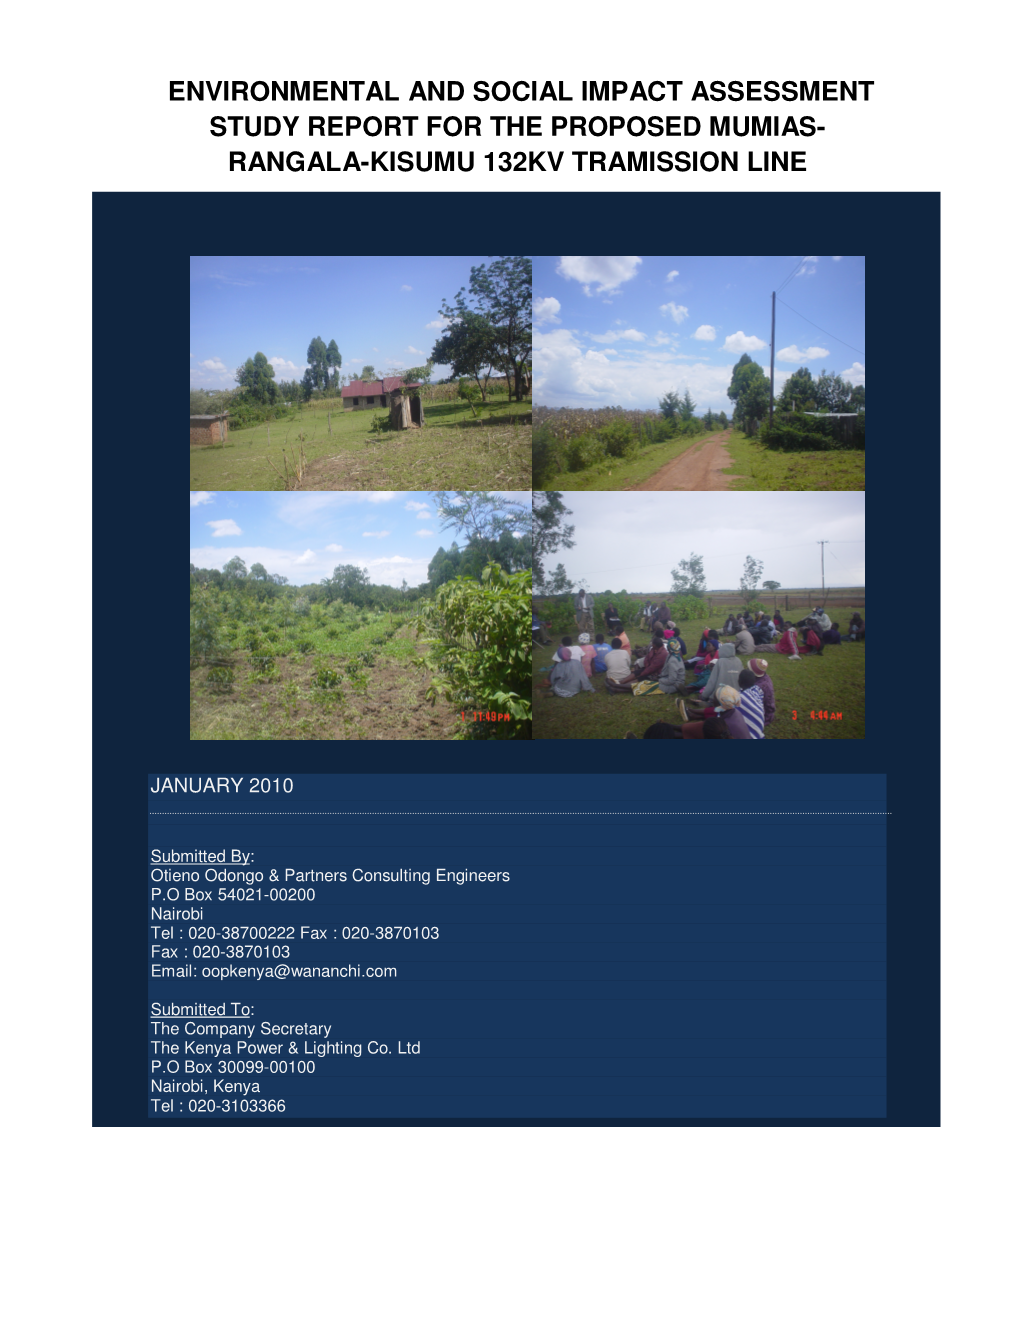 Environmental and Social Impact Assessment Study Report for the Proposed Mumias